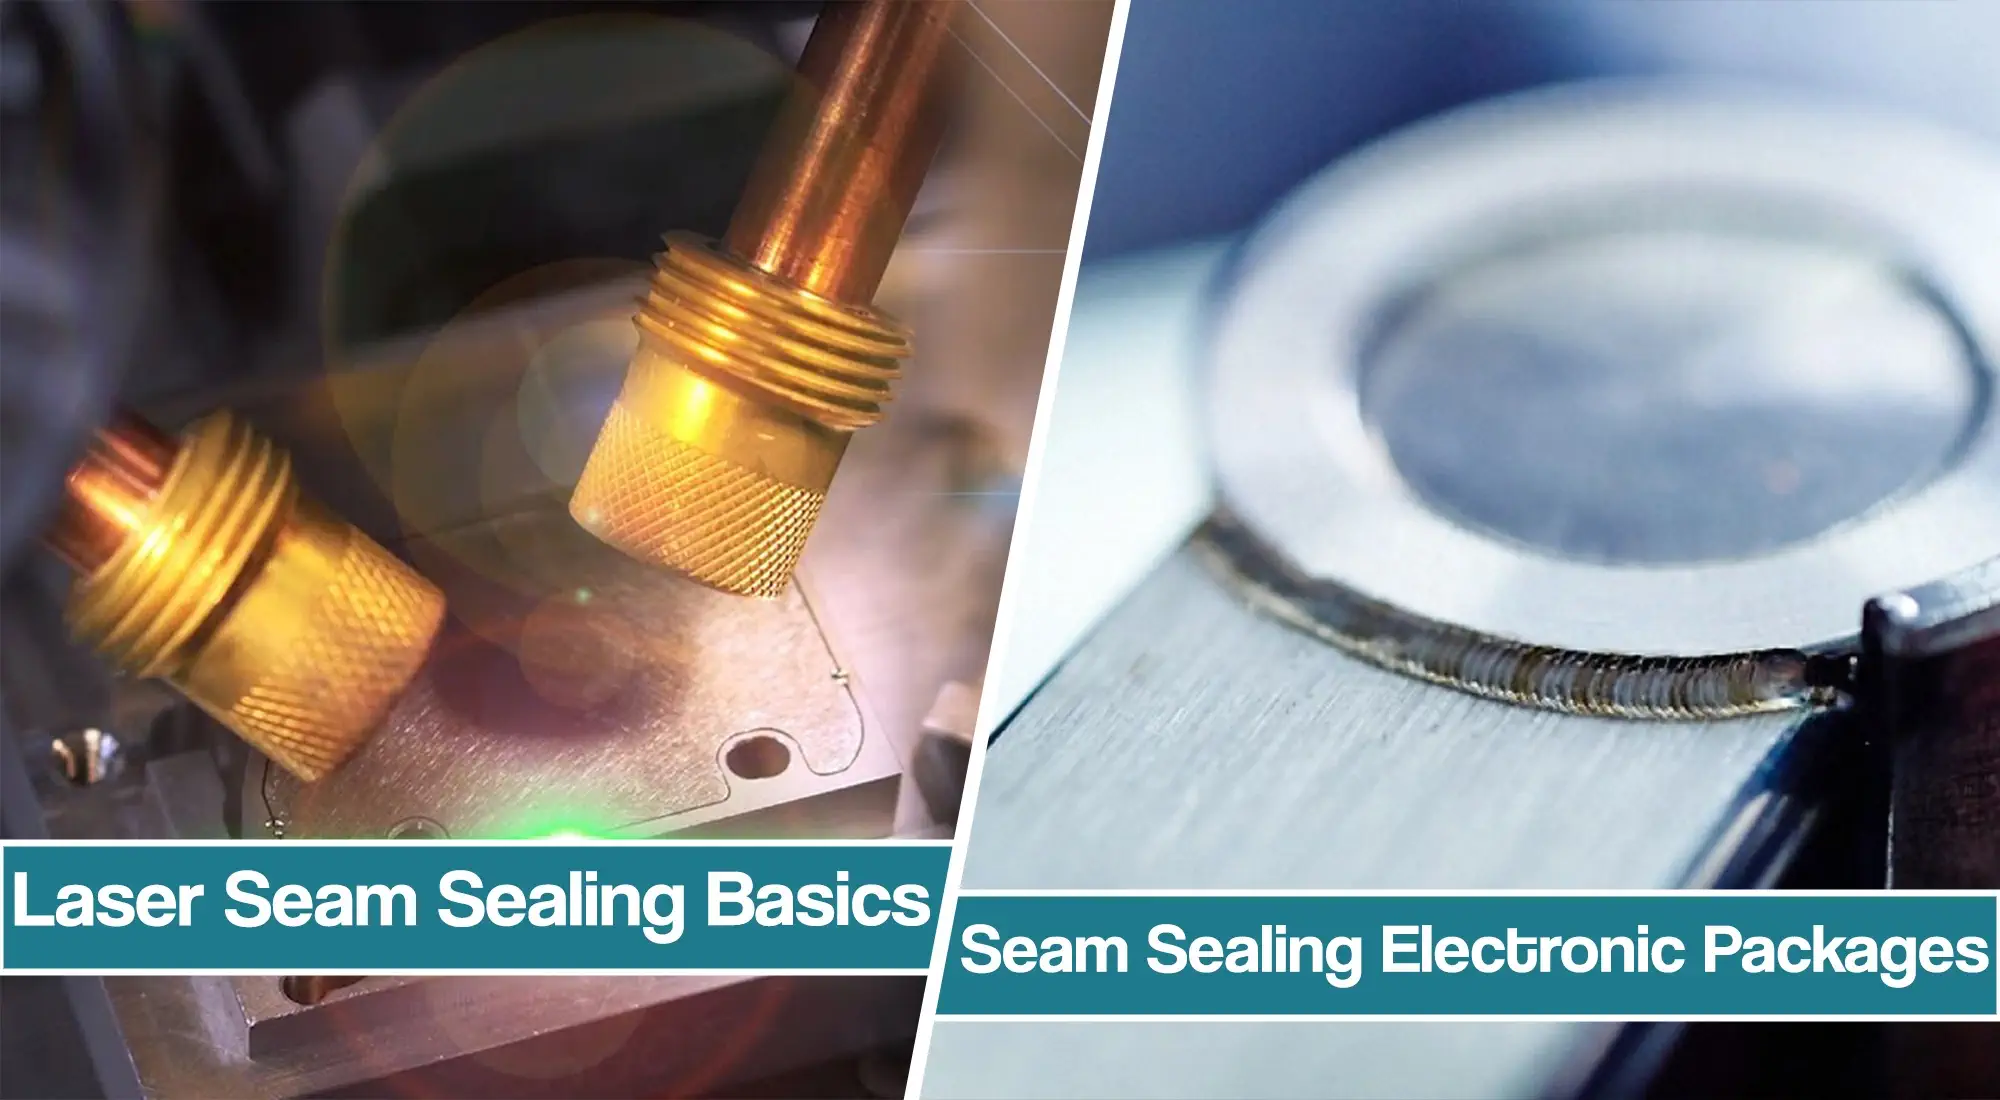 Laser Seam Sealing Electronic Packages